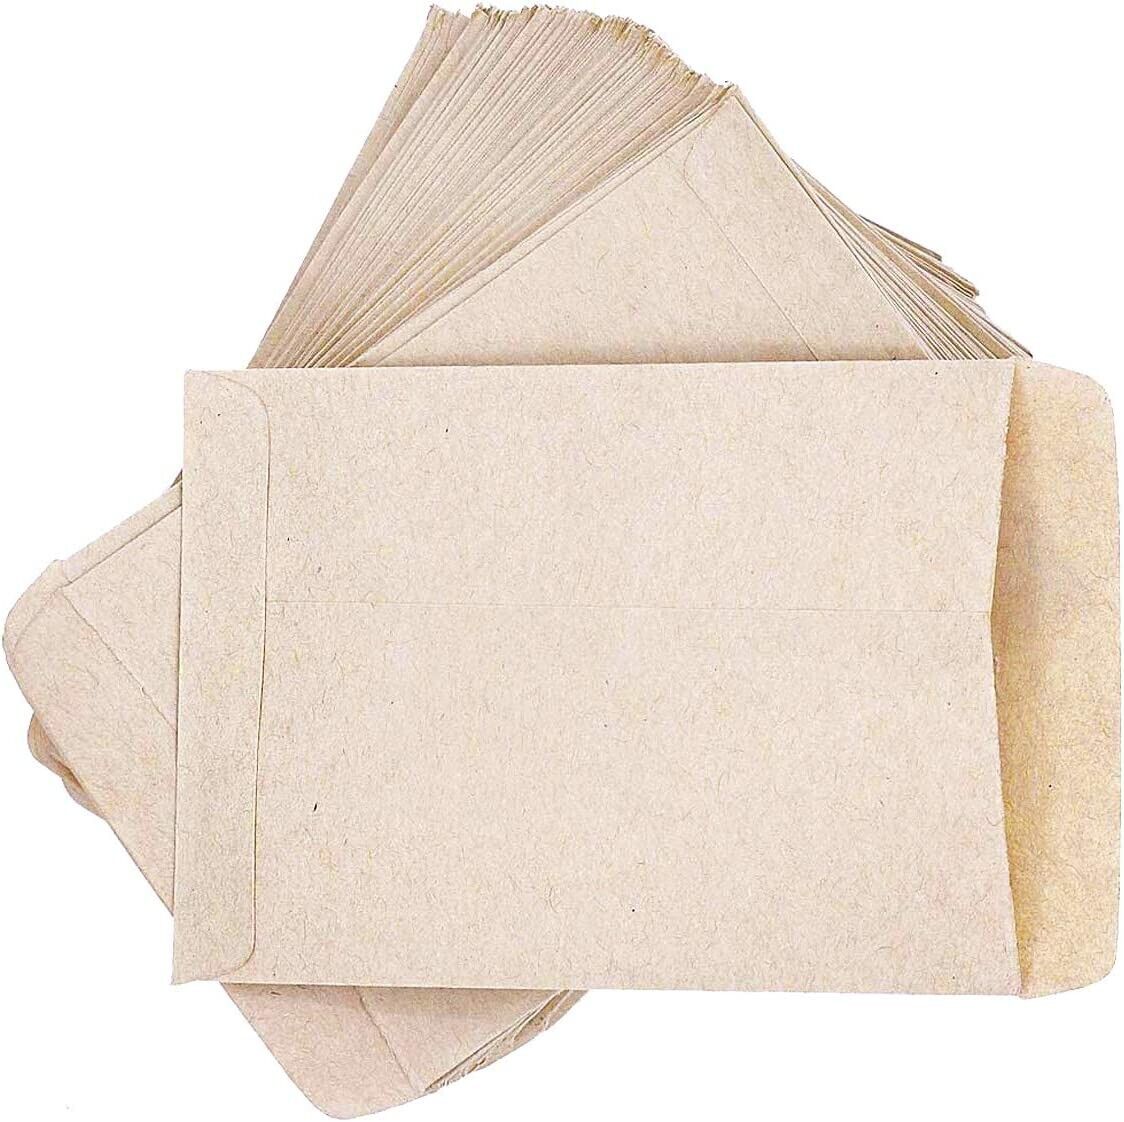 120 PCS Seed Packets Blank Seed Envelopes Empty Seed Paper Bags Bulk for Flowers